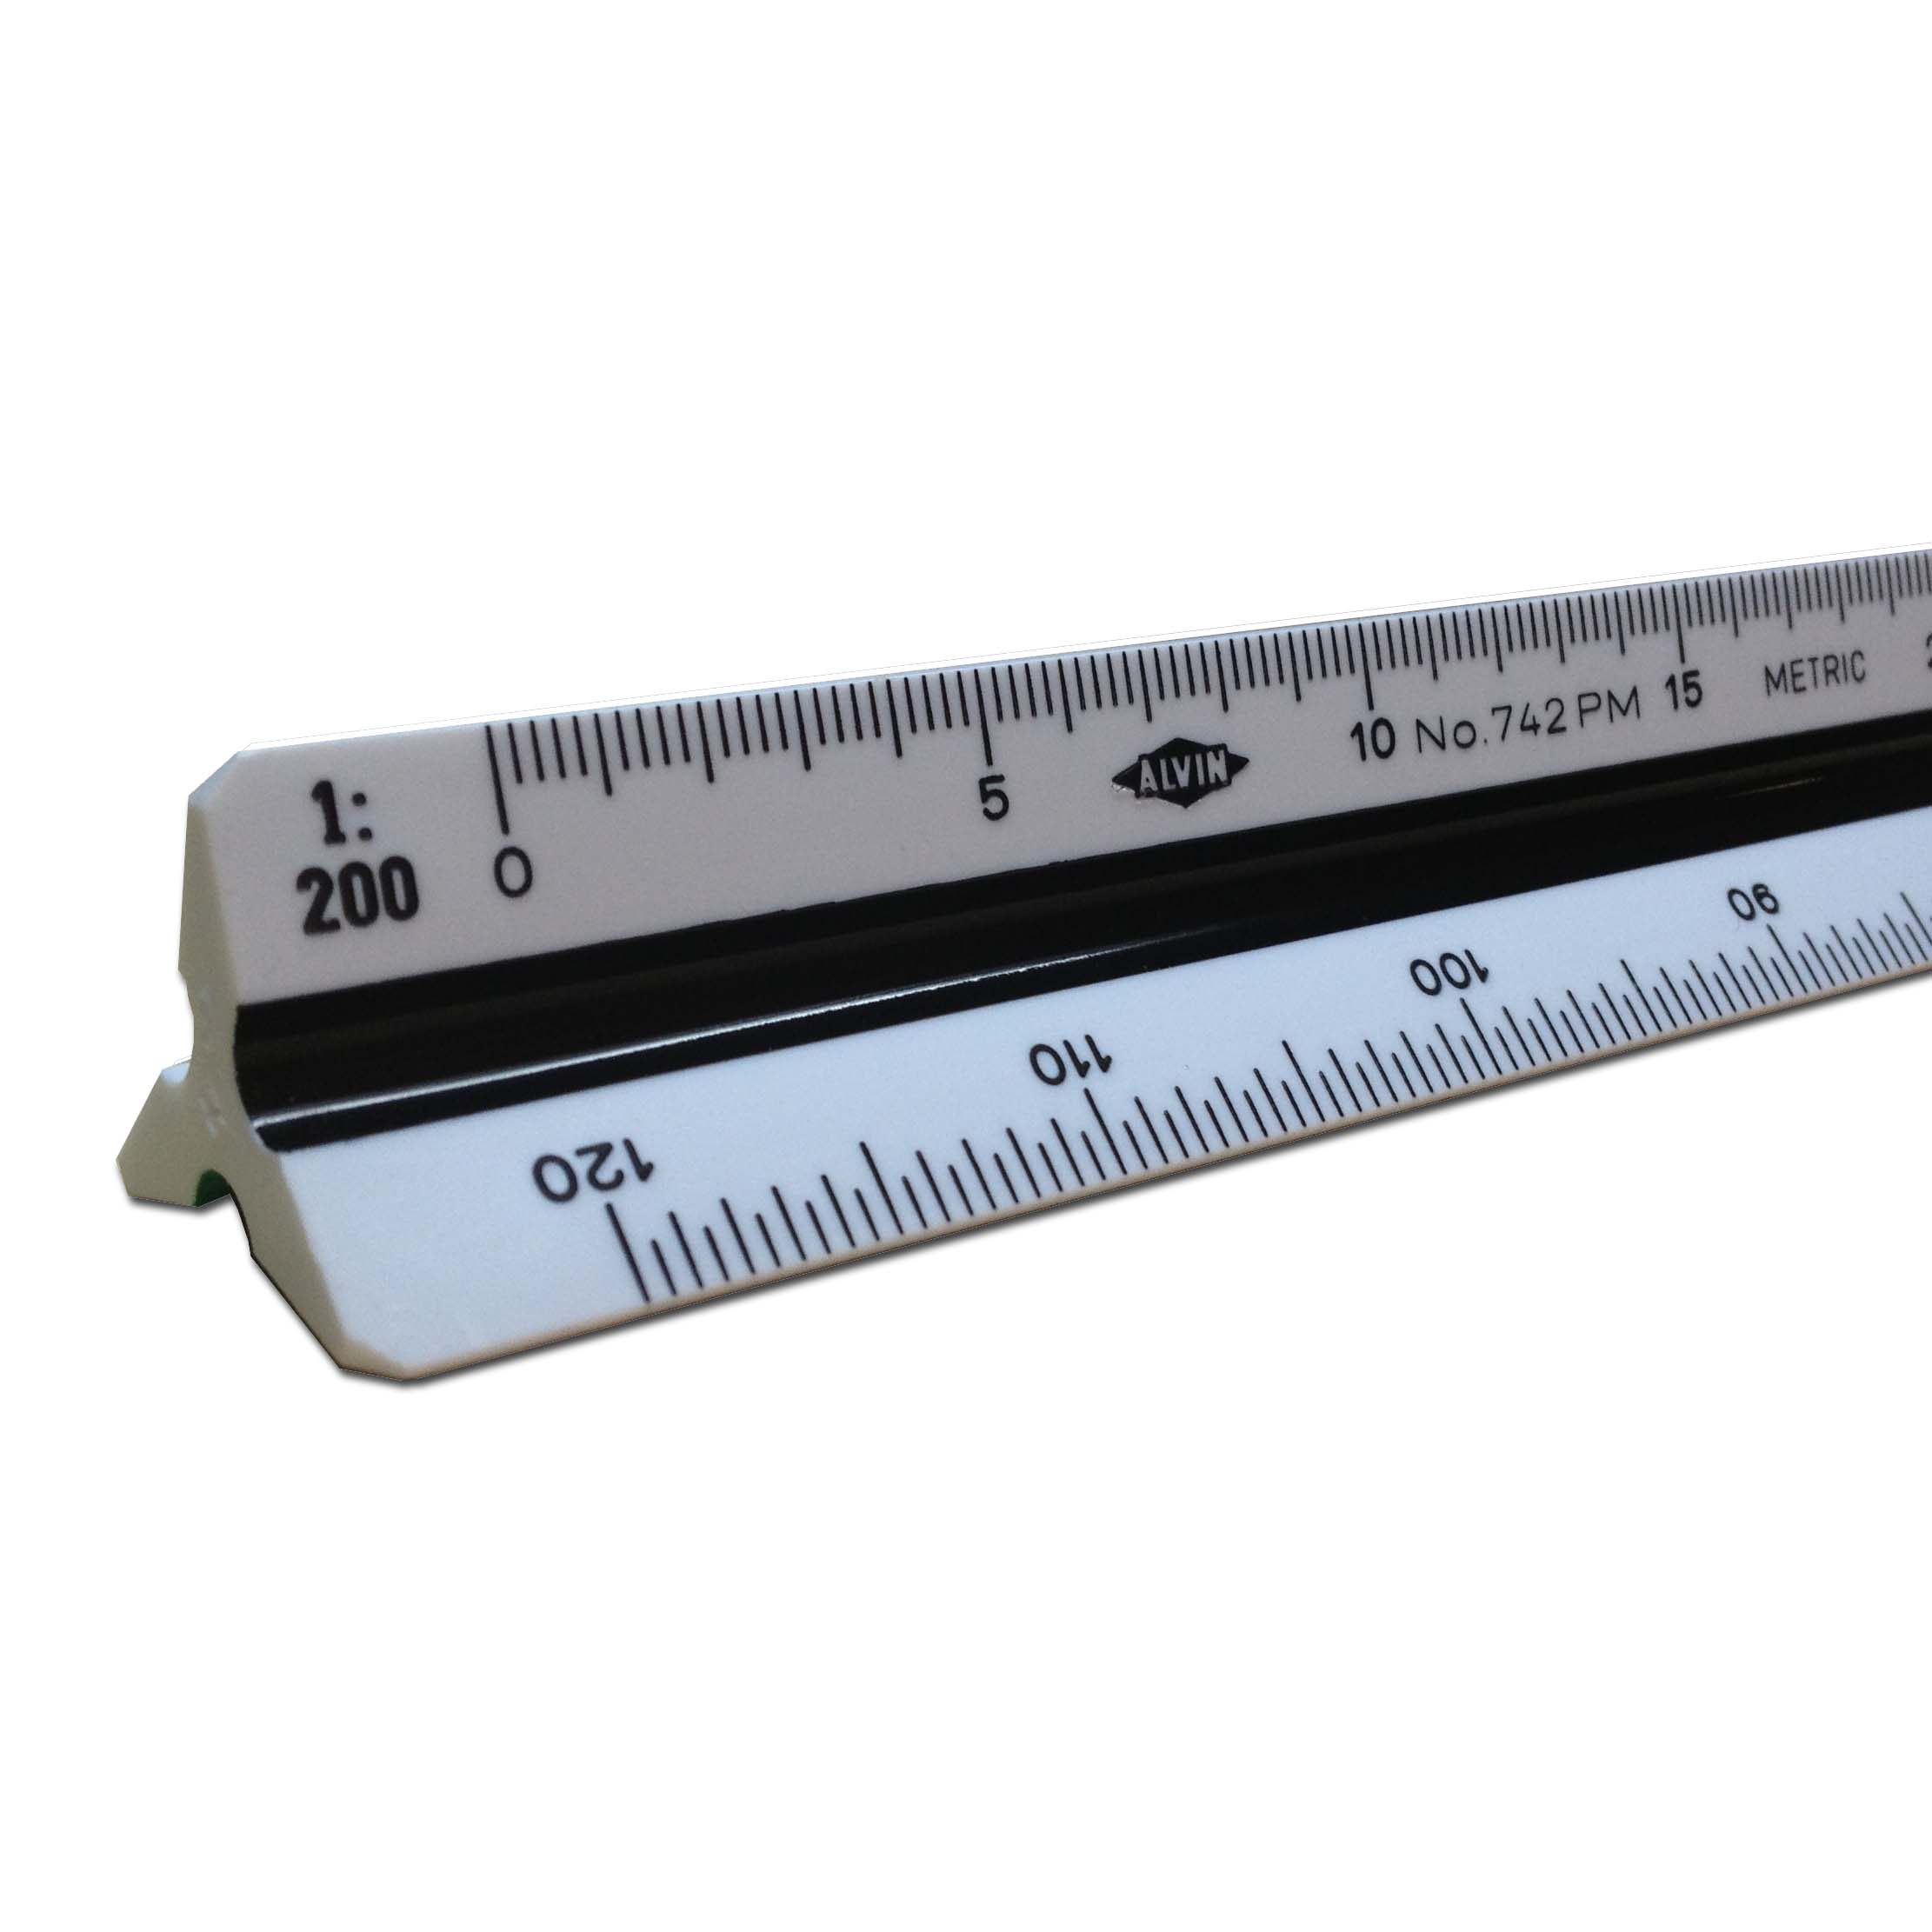 30cm Metric Architect Triangular Scale Drafting Supplies, Ruling and Measuring Tools, Triangular Scales, Triangular Metric Scales